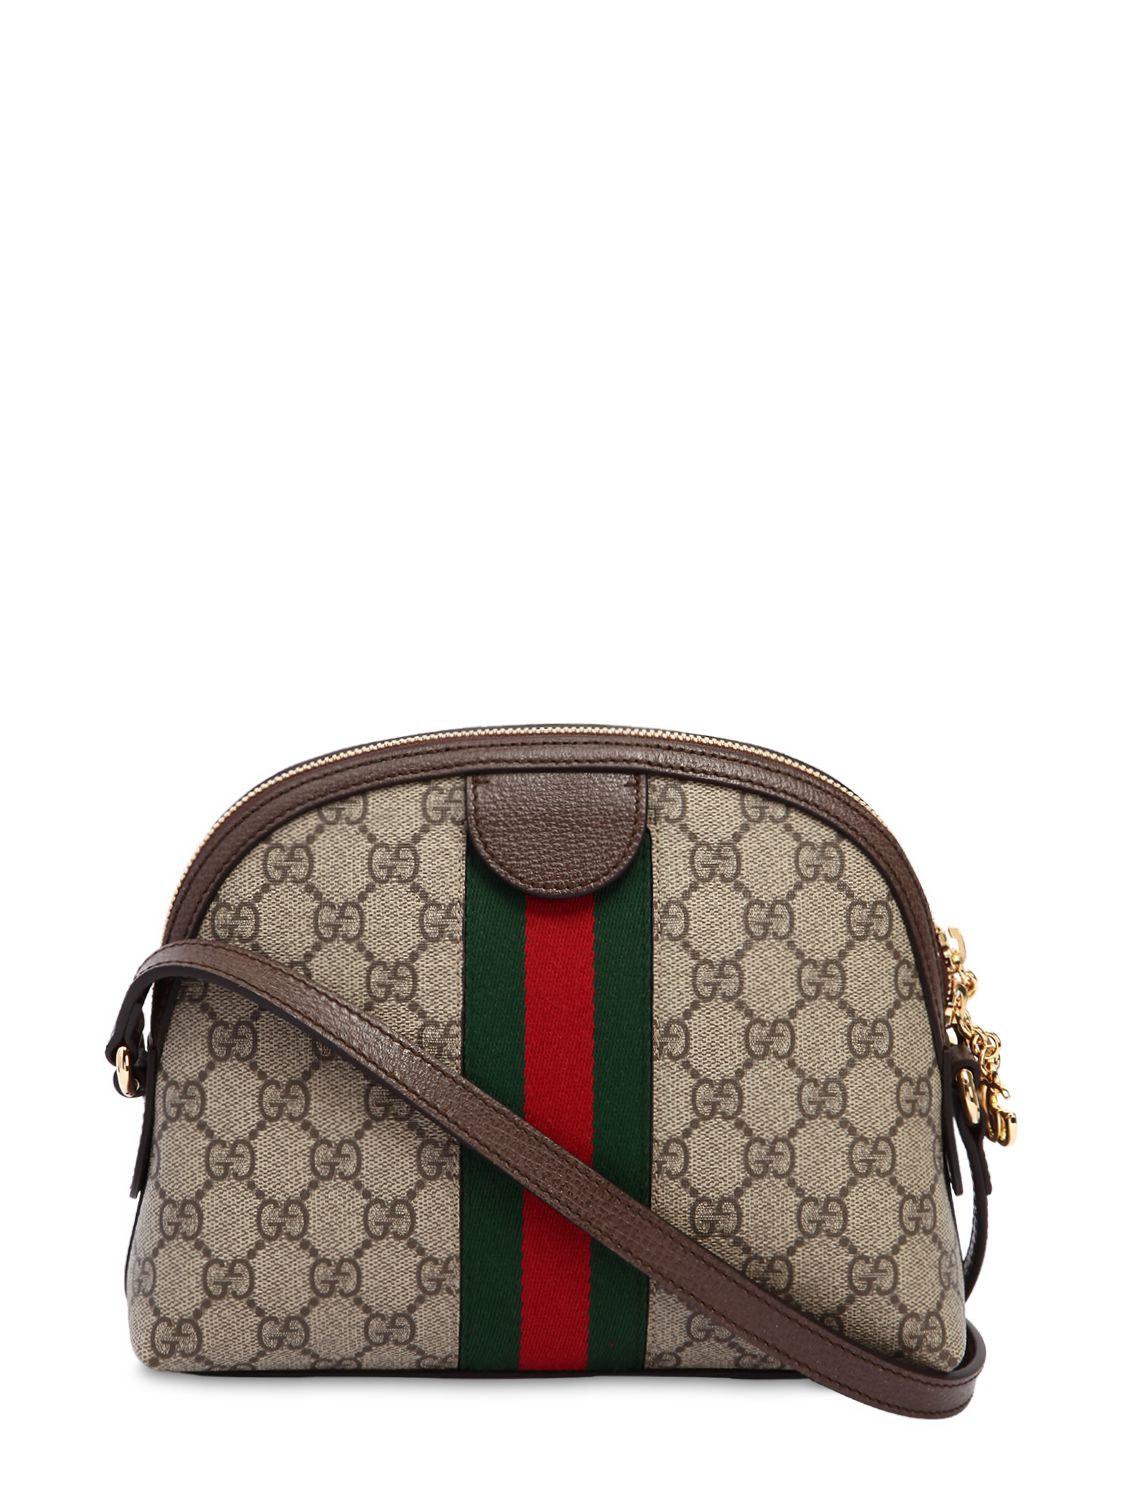 Gucci Leather Ophidia GG Small Shoulder Bag in Brown - Lyst